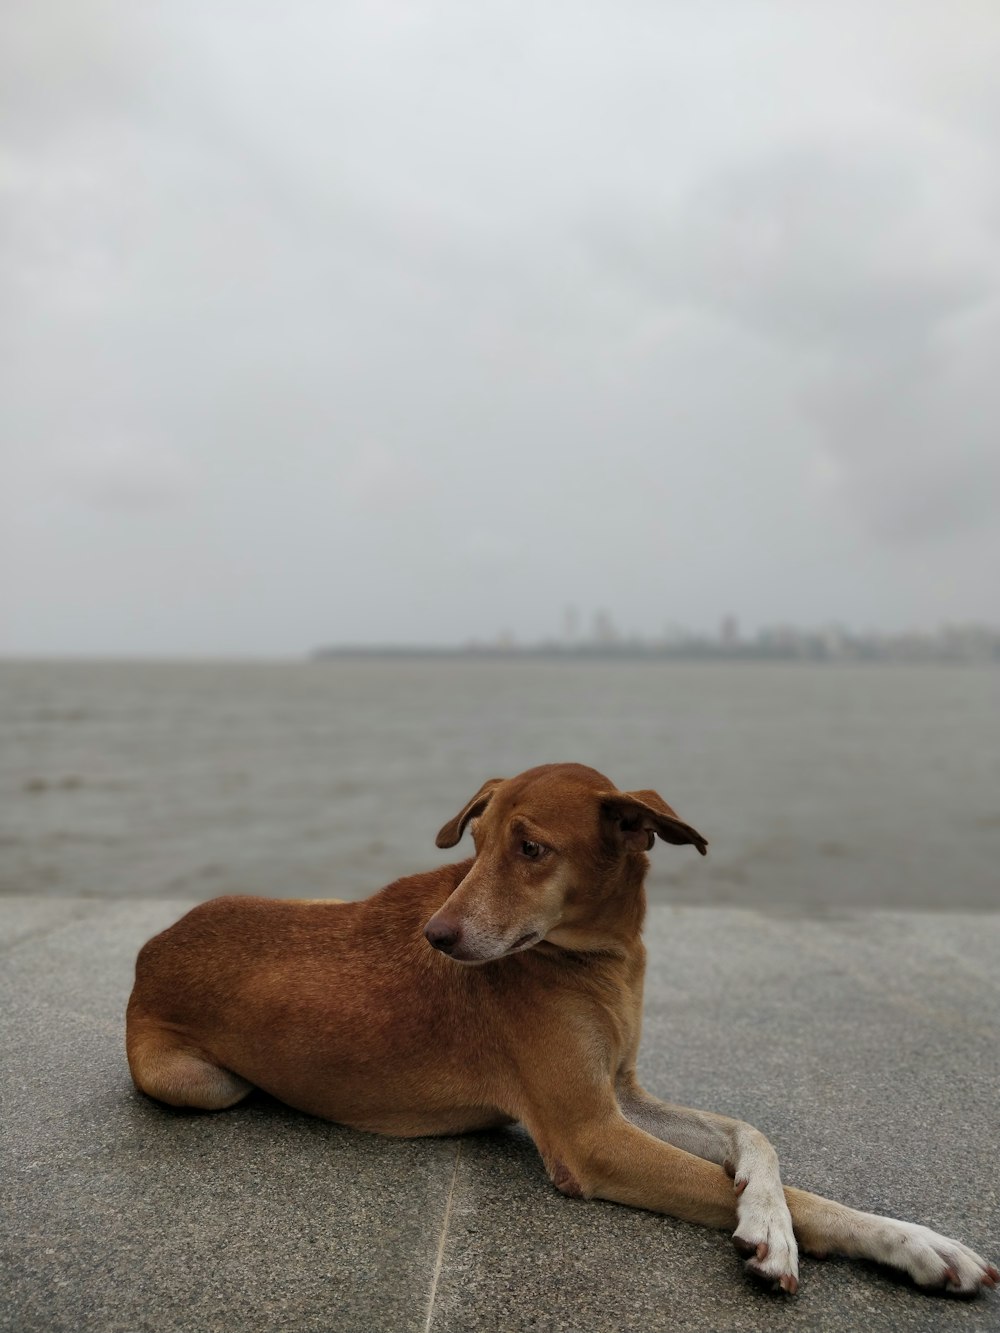 short-coated brown dog laying on pavement on a cloudy day